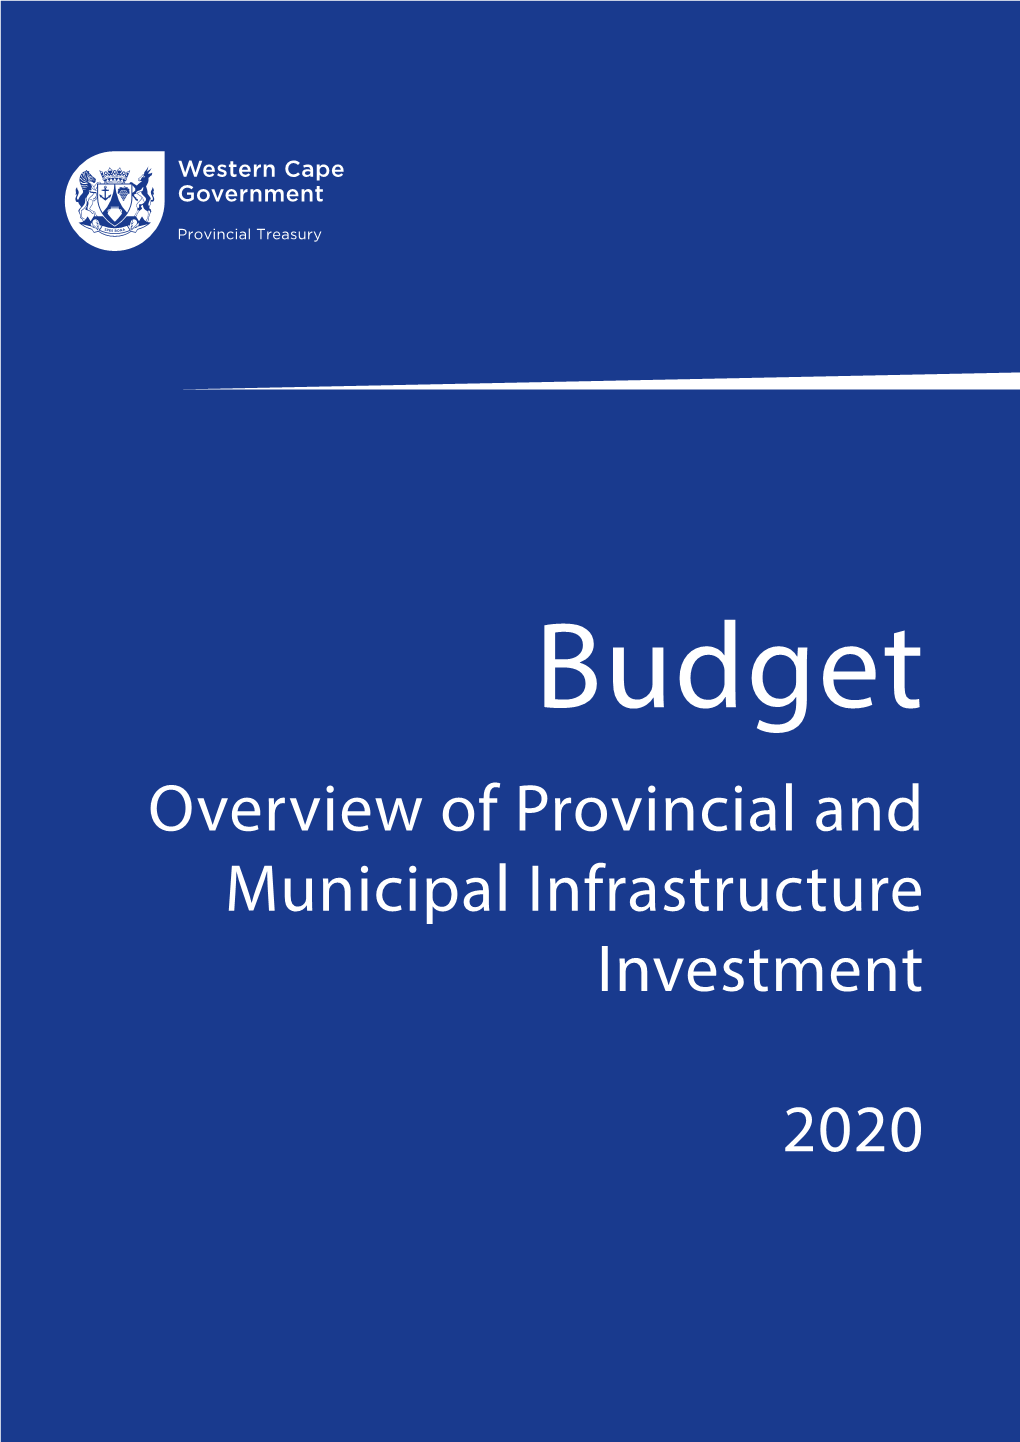 Overview of Provincial and Municipal Infrastructure Investment 2020